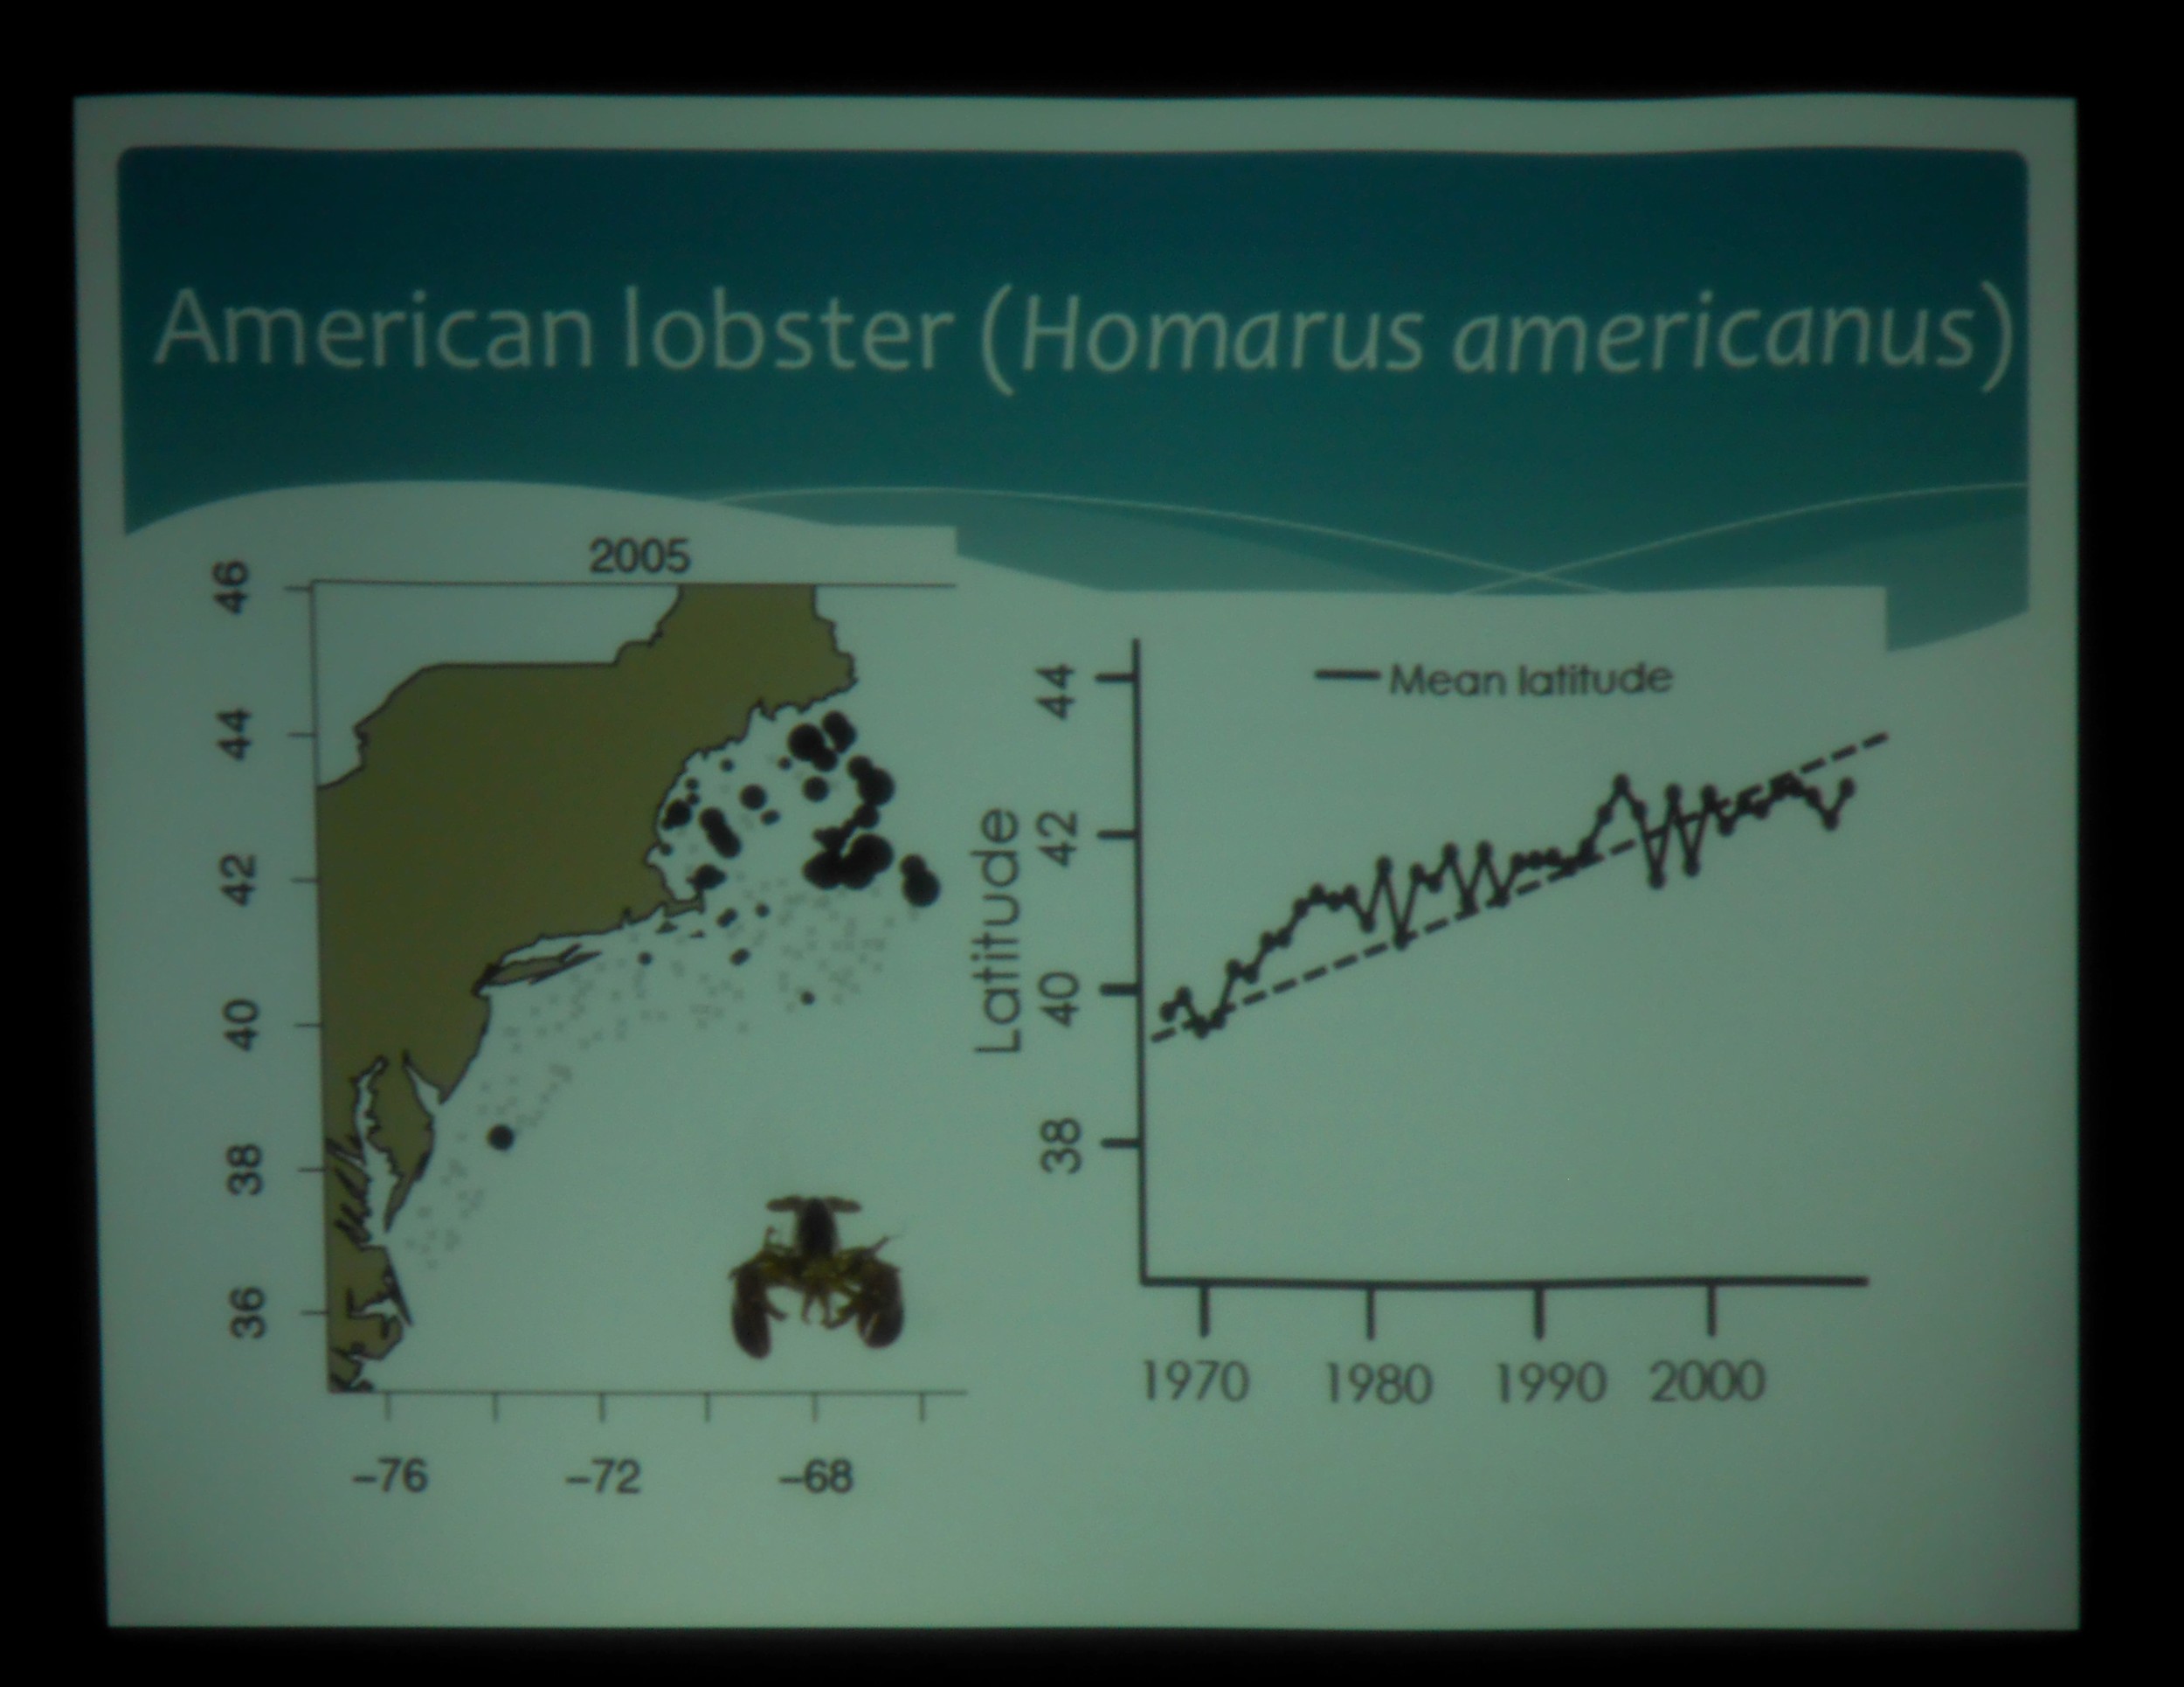 One of Kristin's slides shows that the average latitude at which lobsters are found is shifting north -- likely a response to warming waters.